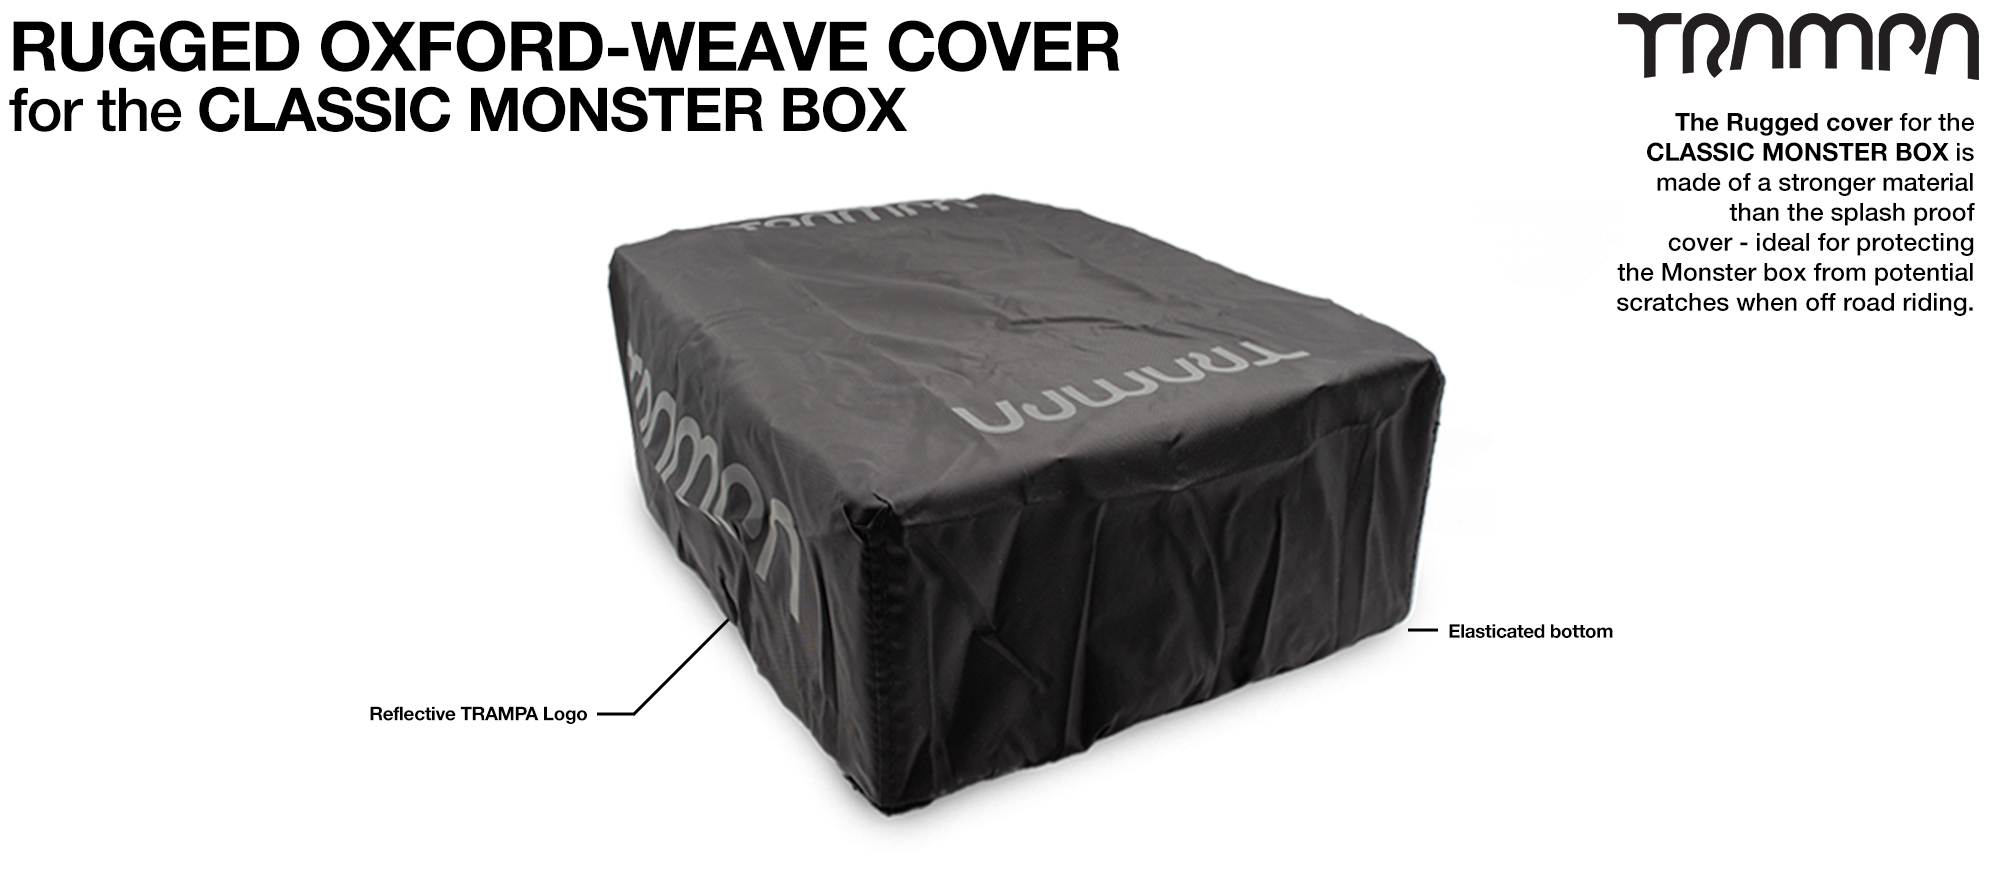 CLASSIC Monster Box - Rugged OXFORD Weave Protective Cover 